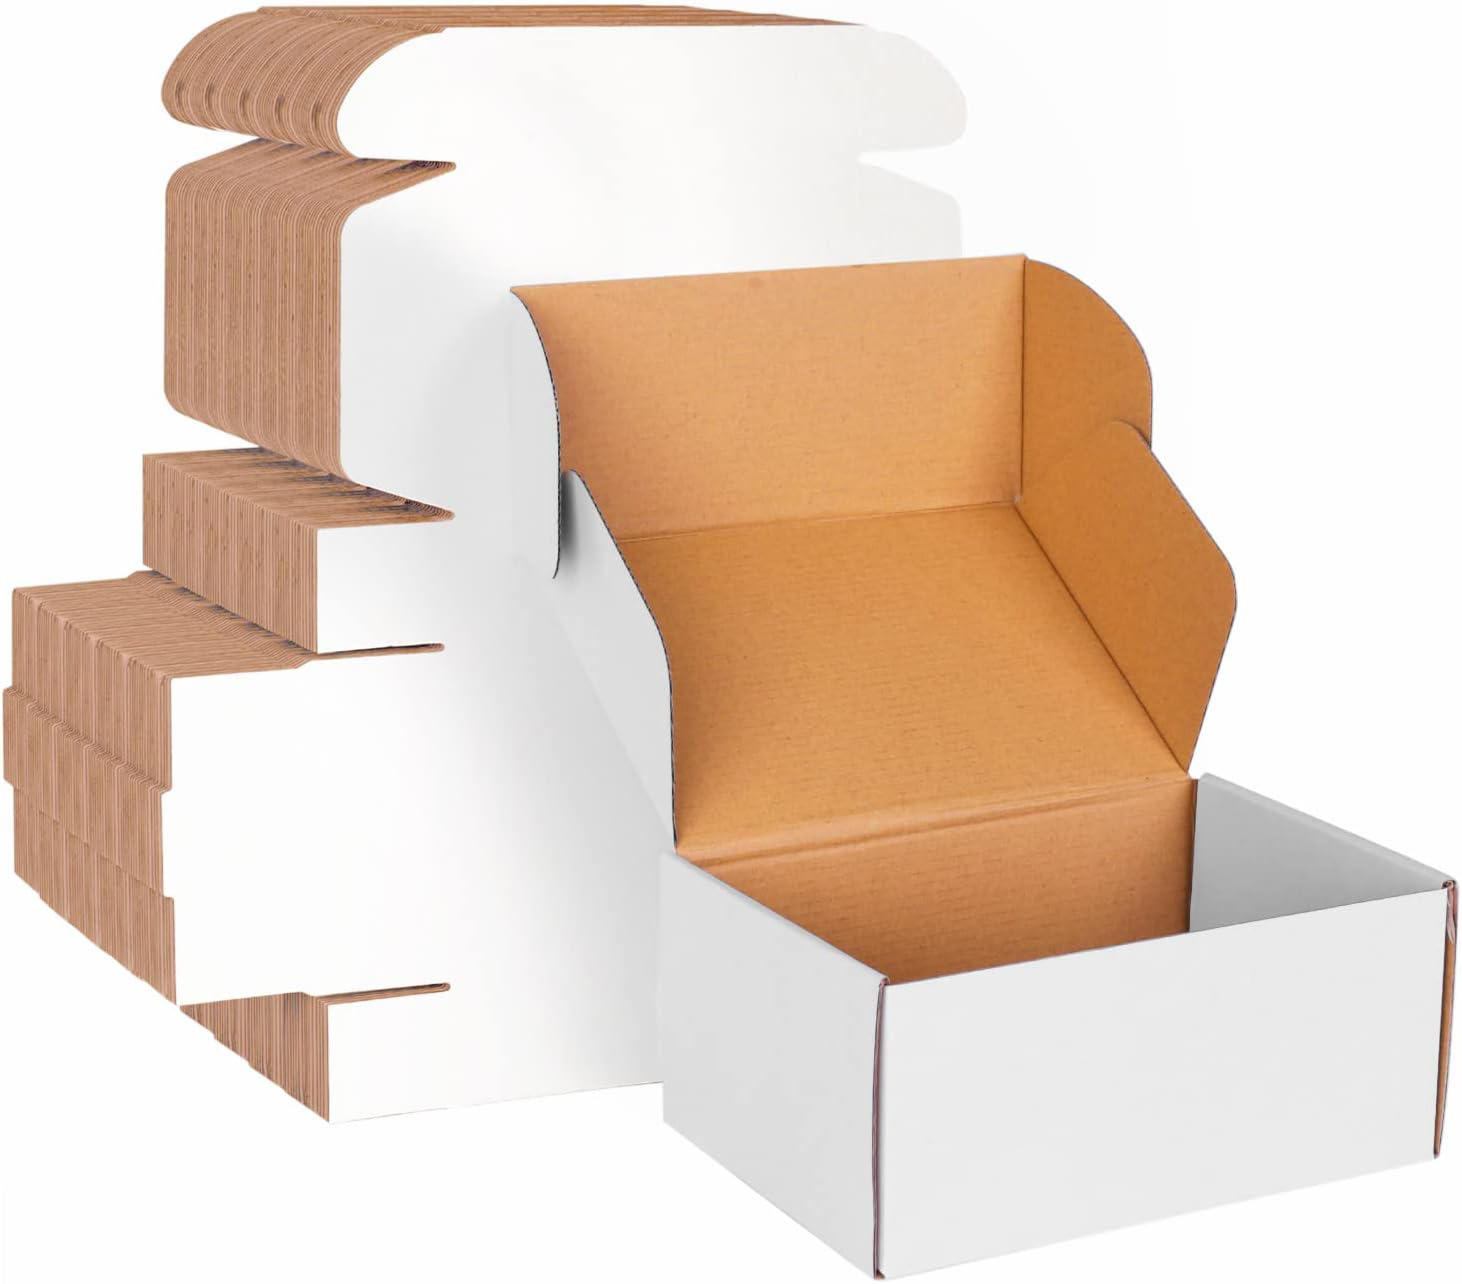 6x4x3 White Cardboard Boxes 30 Pack, Small Shipping Boxes for Small Business Mai